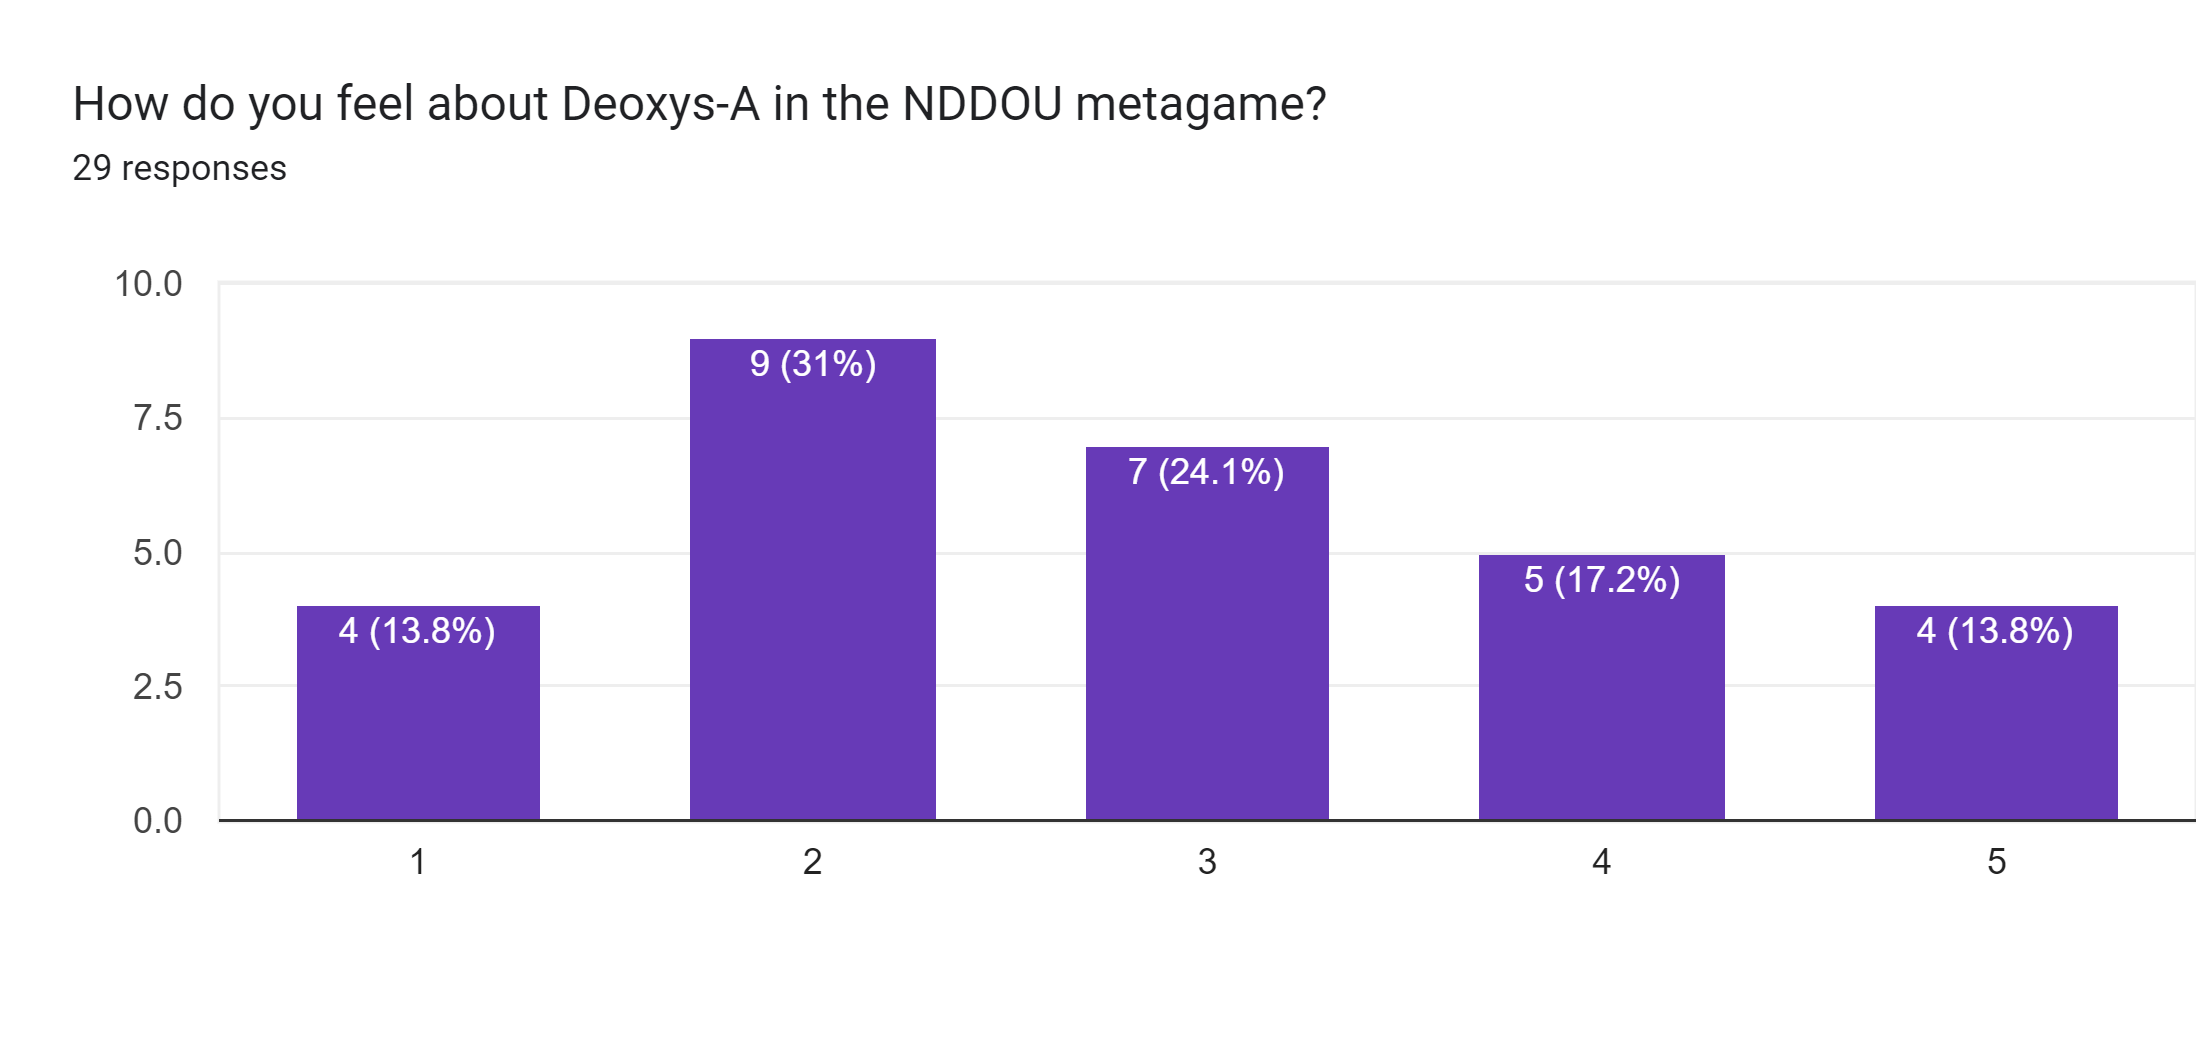 Forms response chart. Question title: How do you feel about Deoxys-A in the NDDOU metagame?. Number of responses: 29 responses.